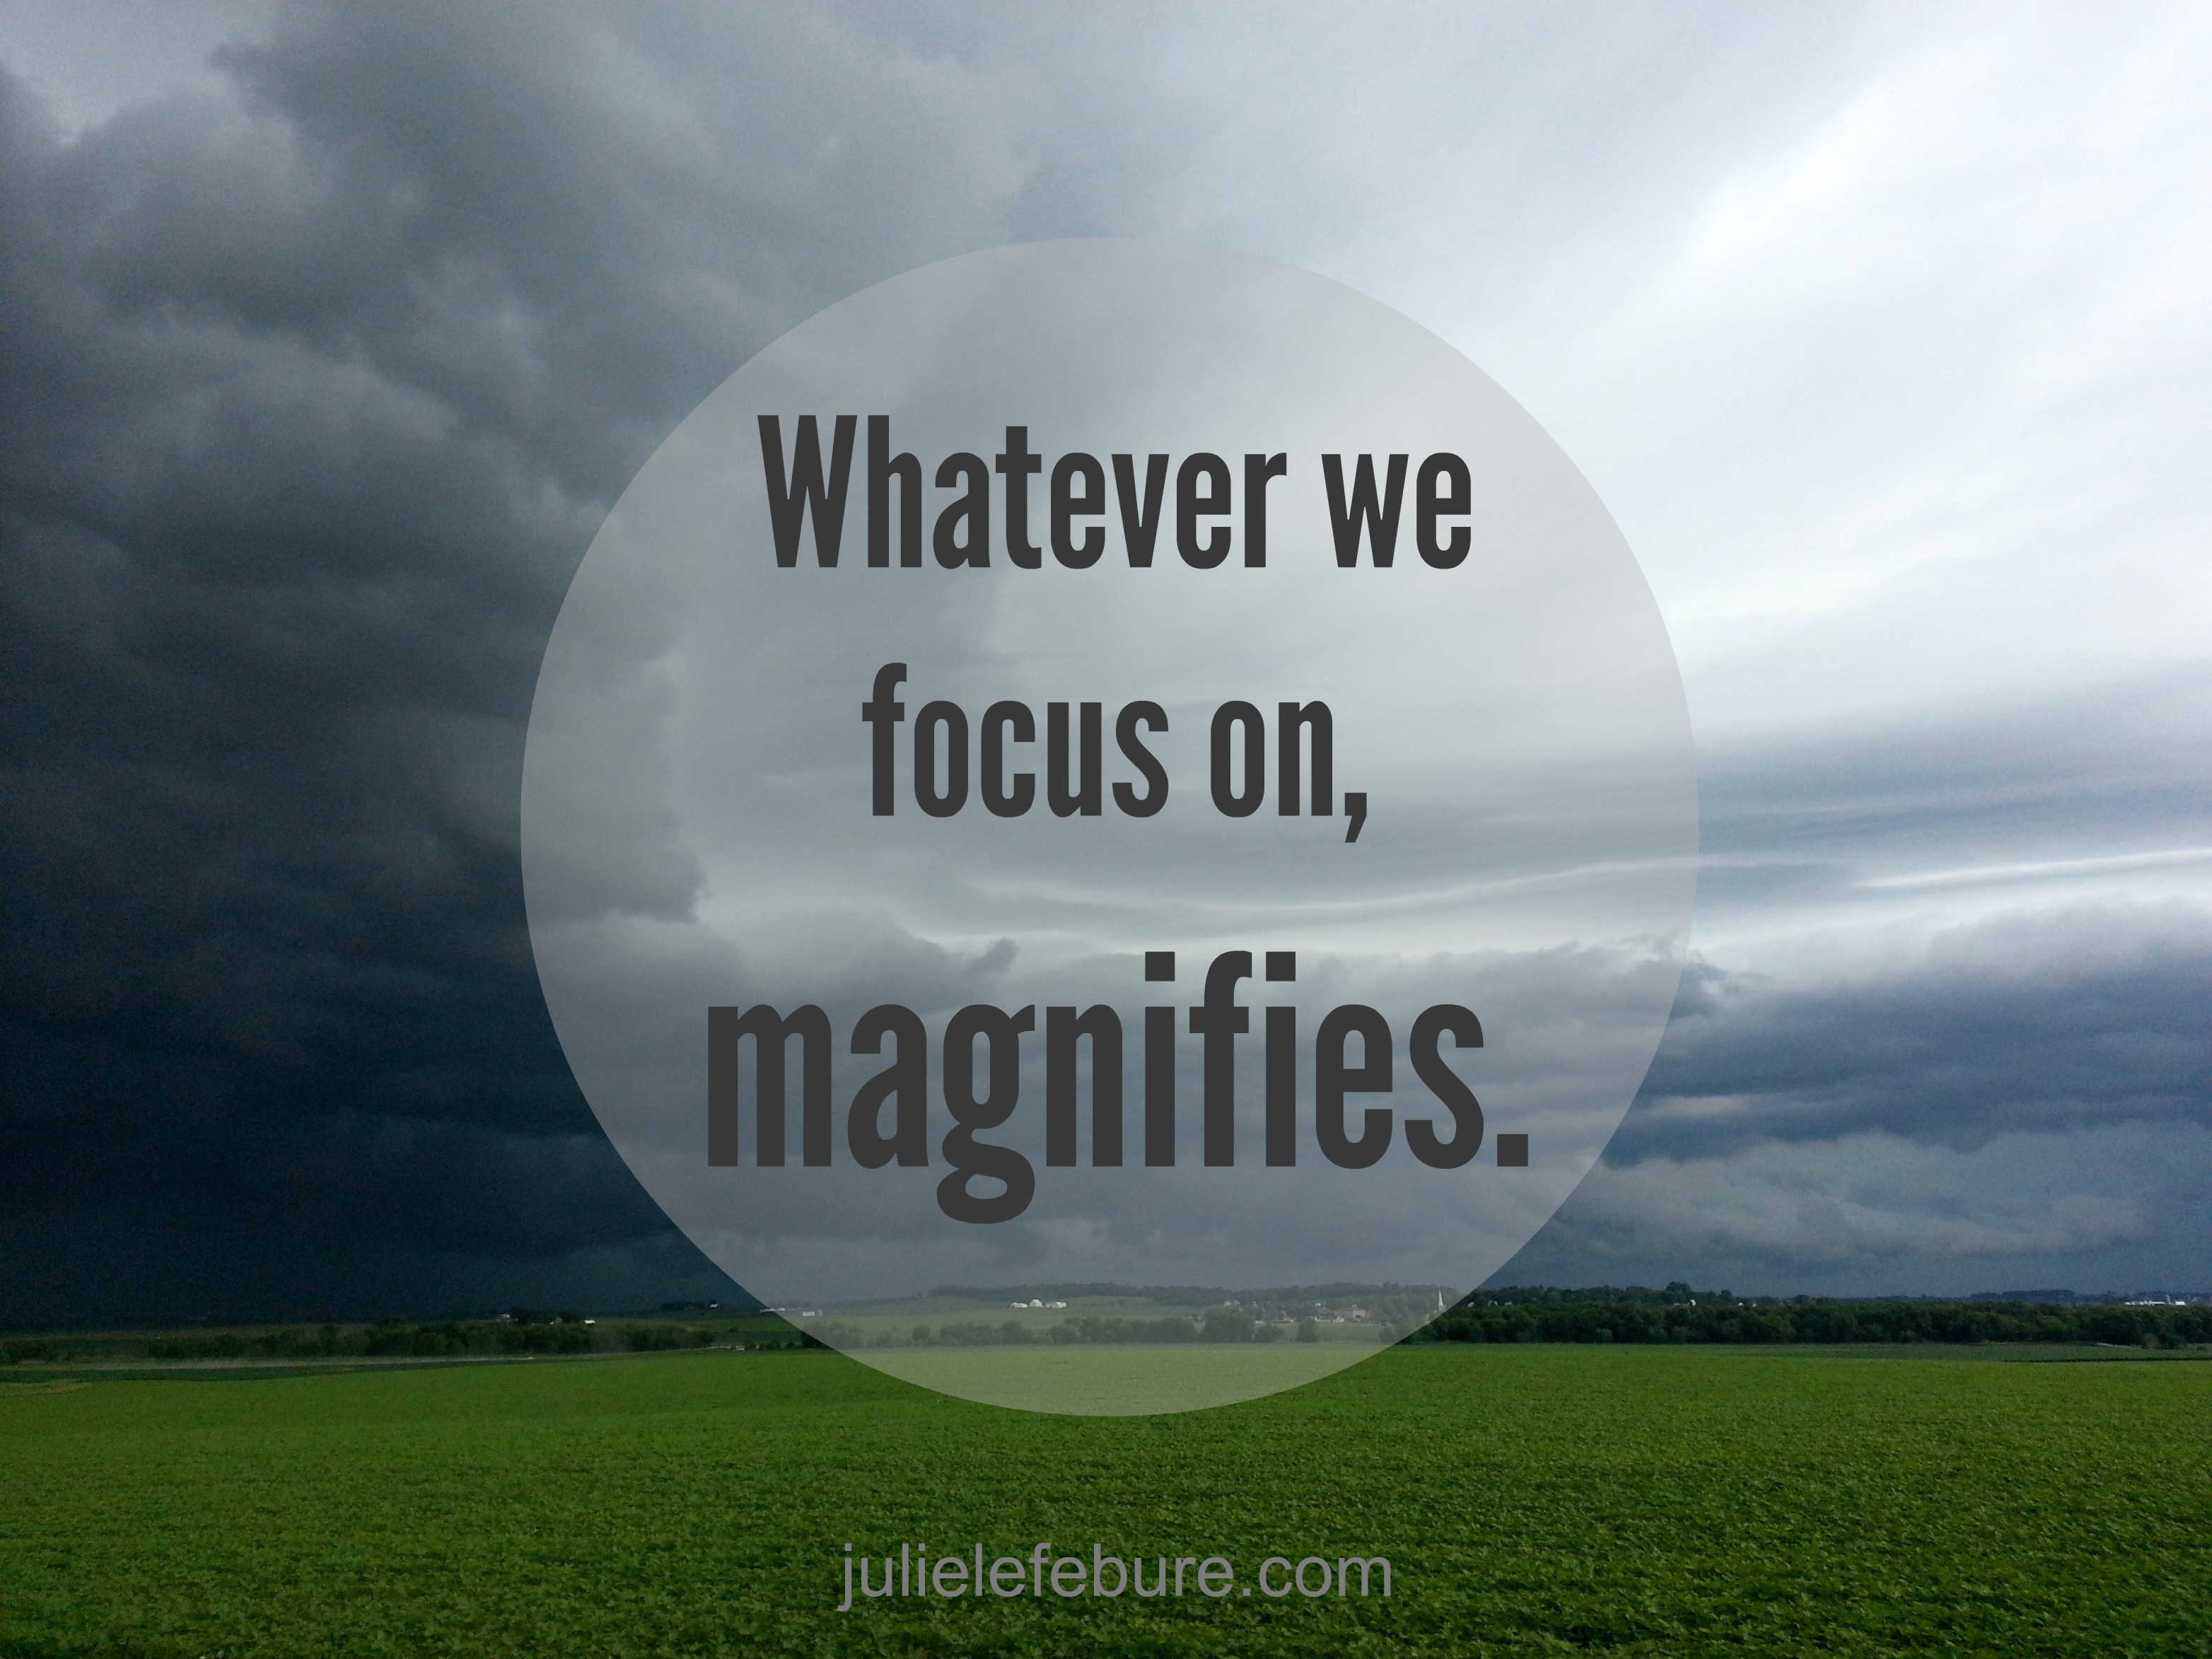 Our Focus Makes All The Difference